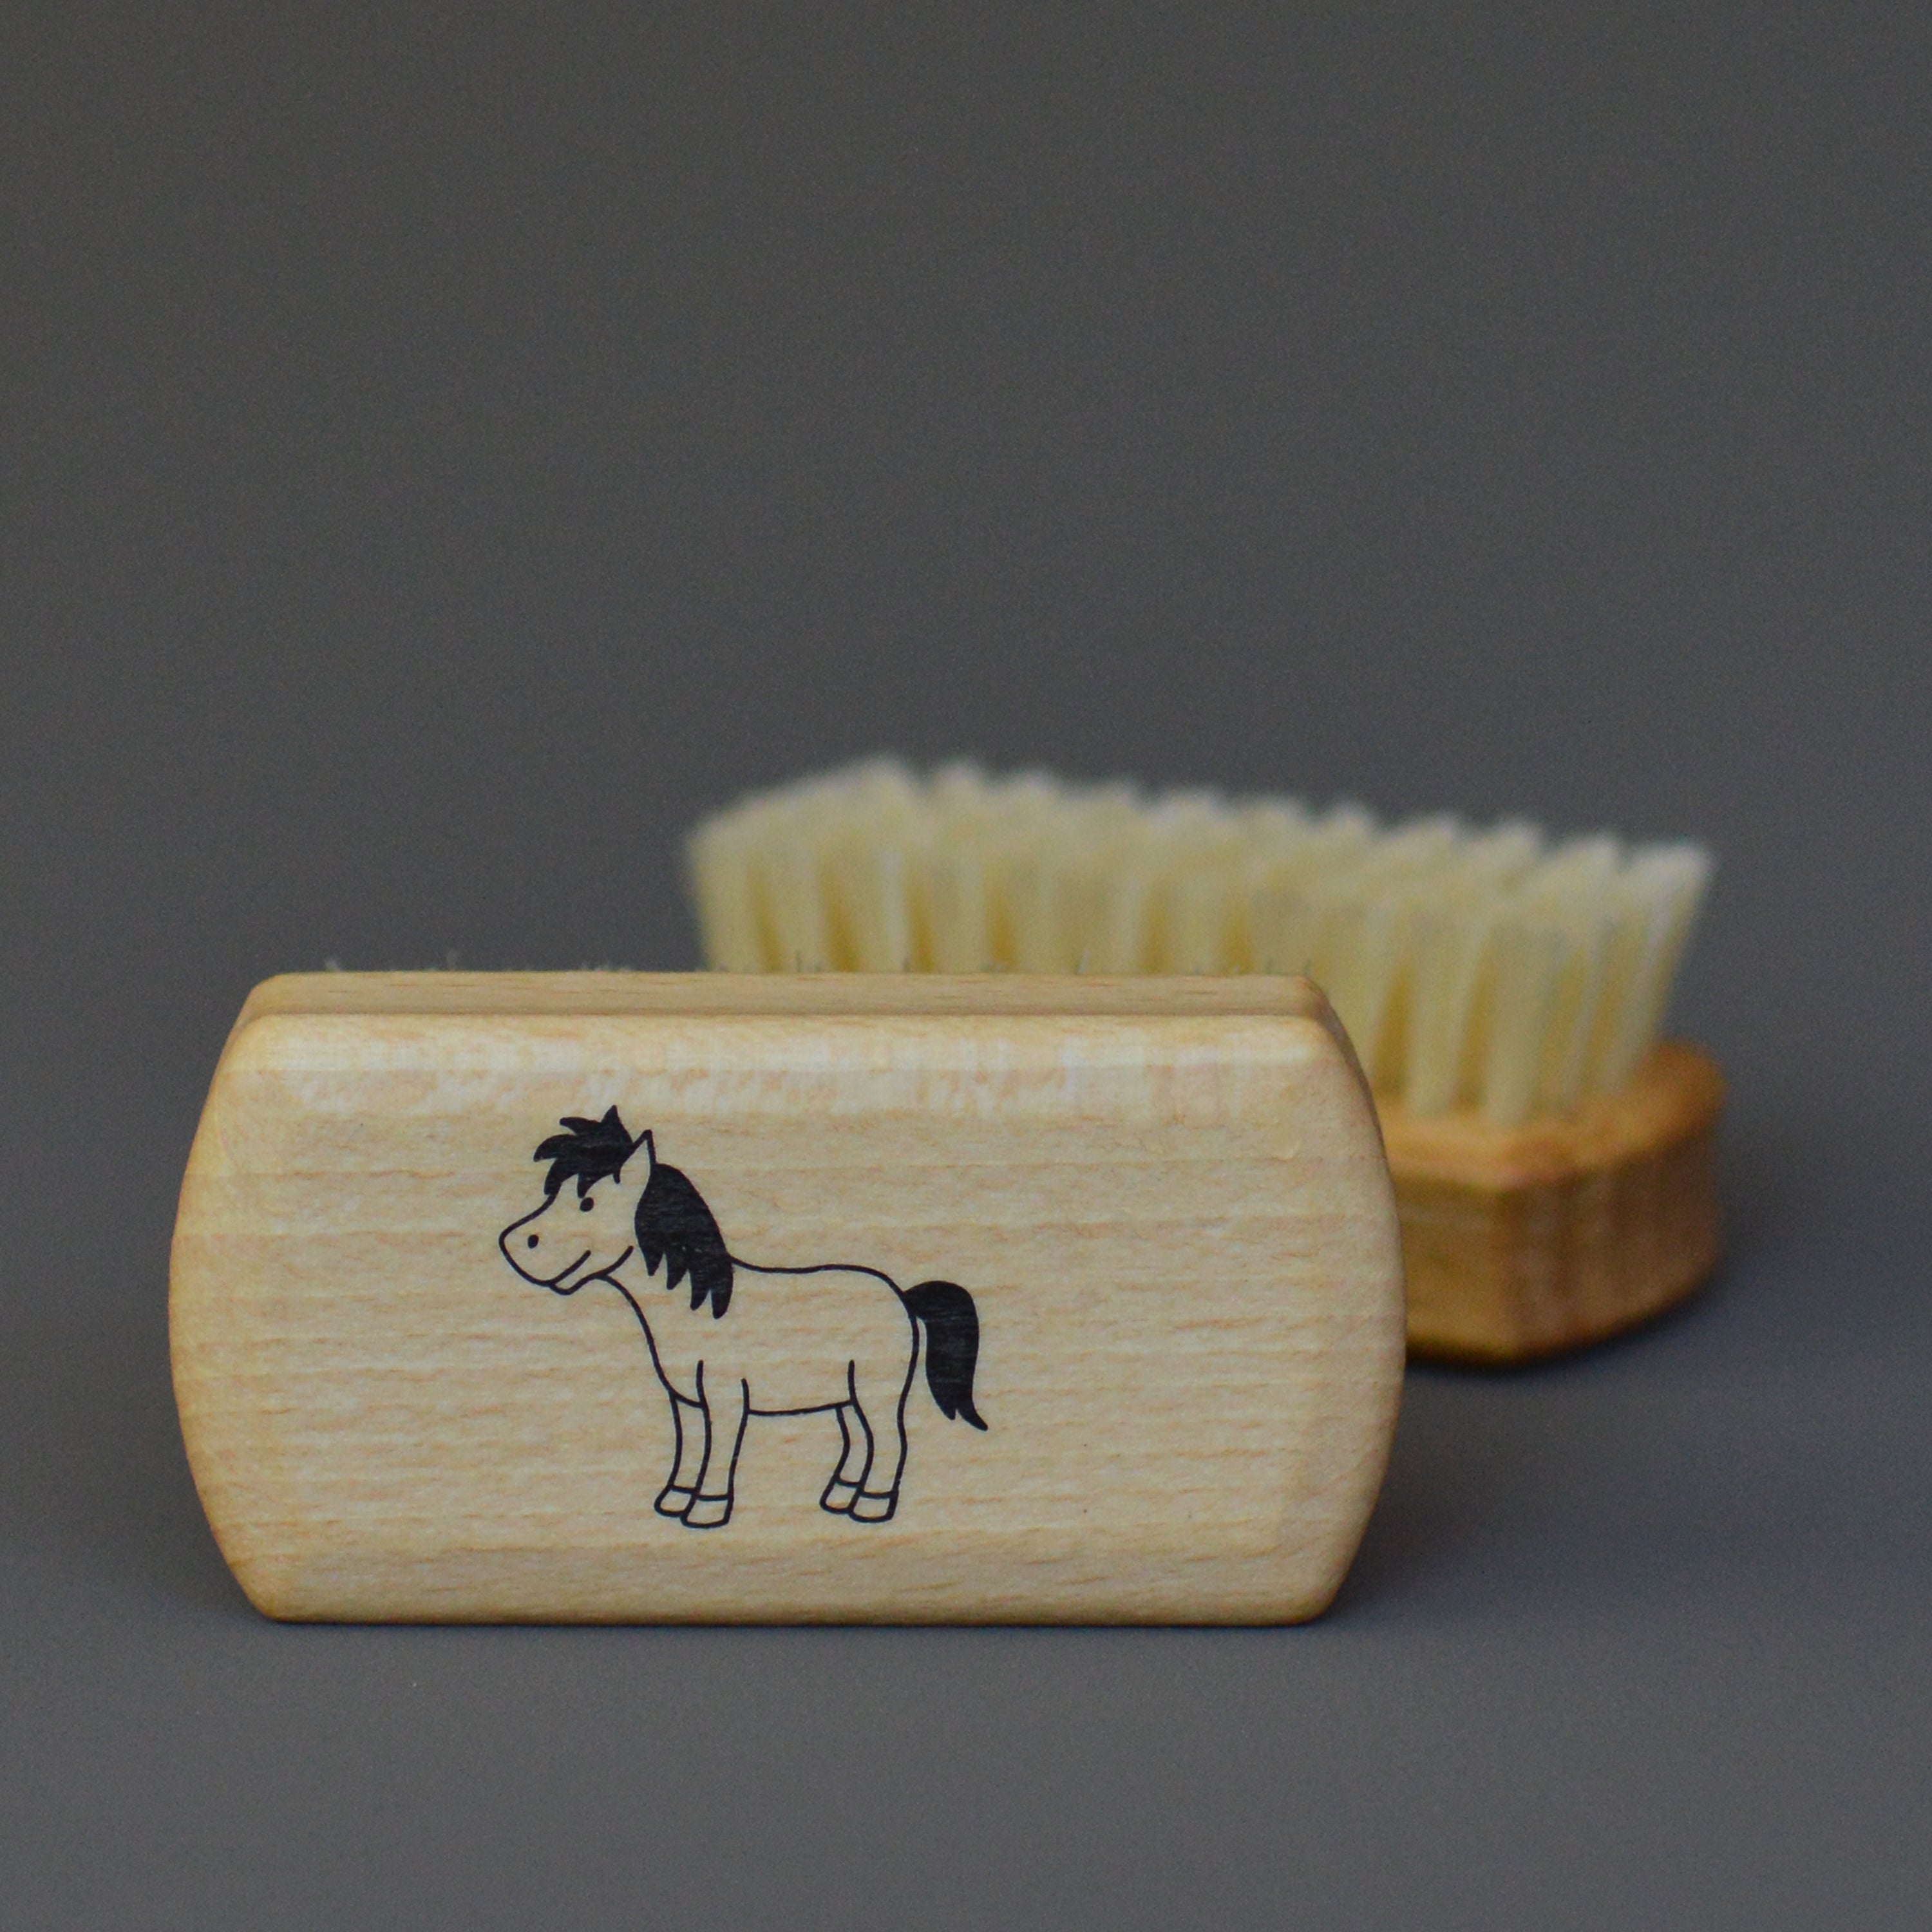 Nail Brush with Horse